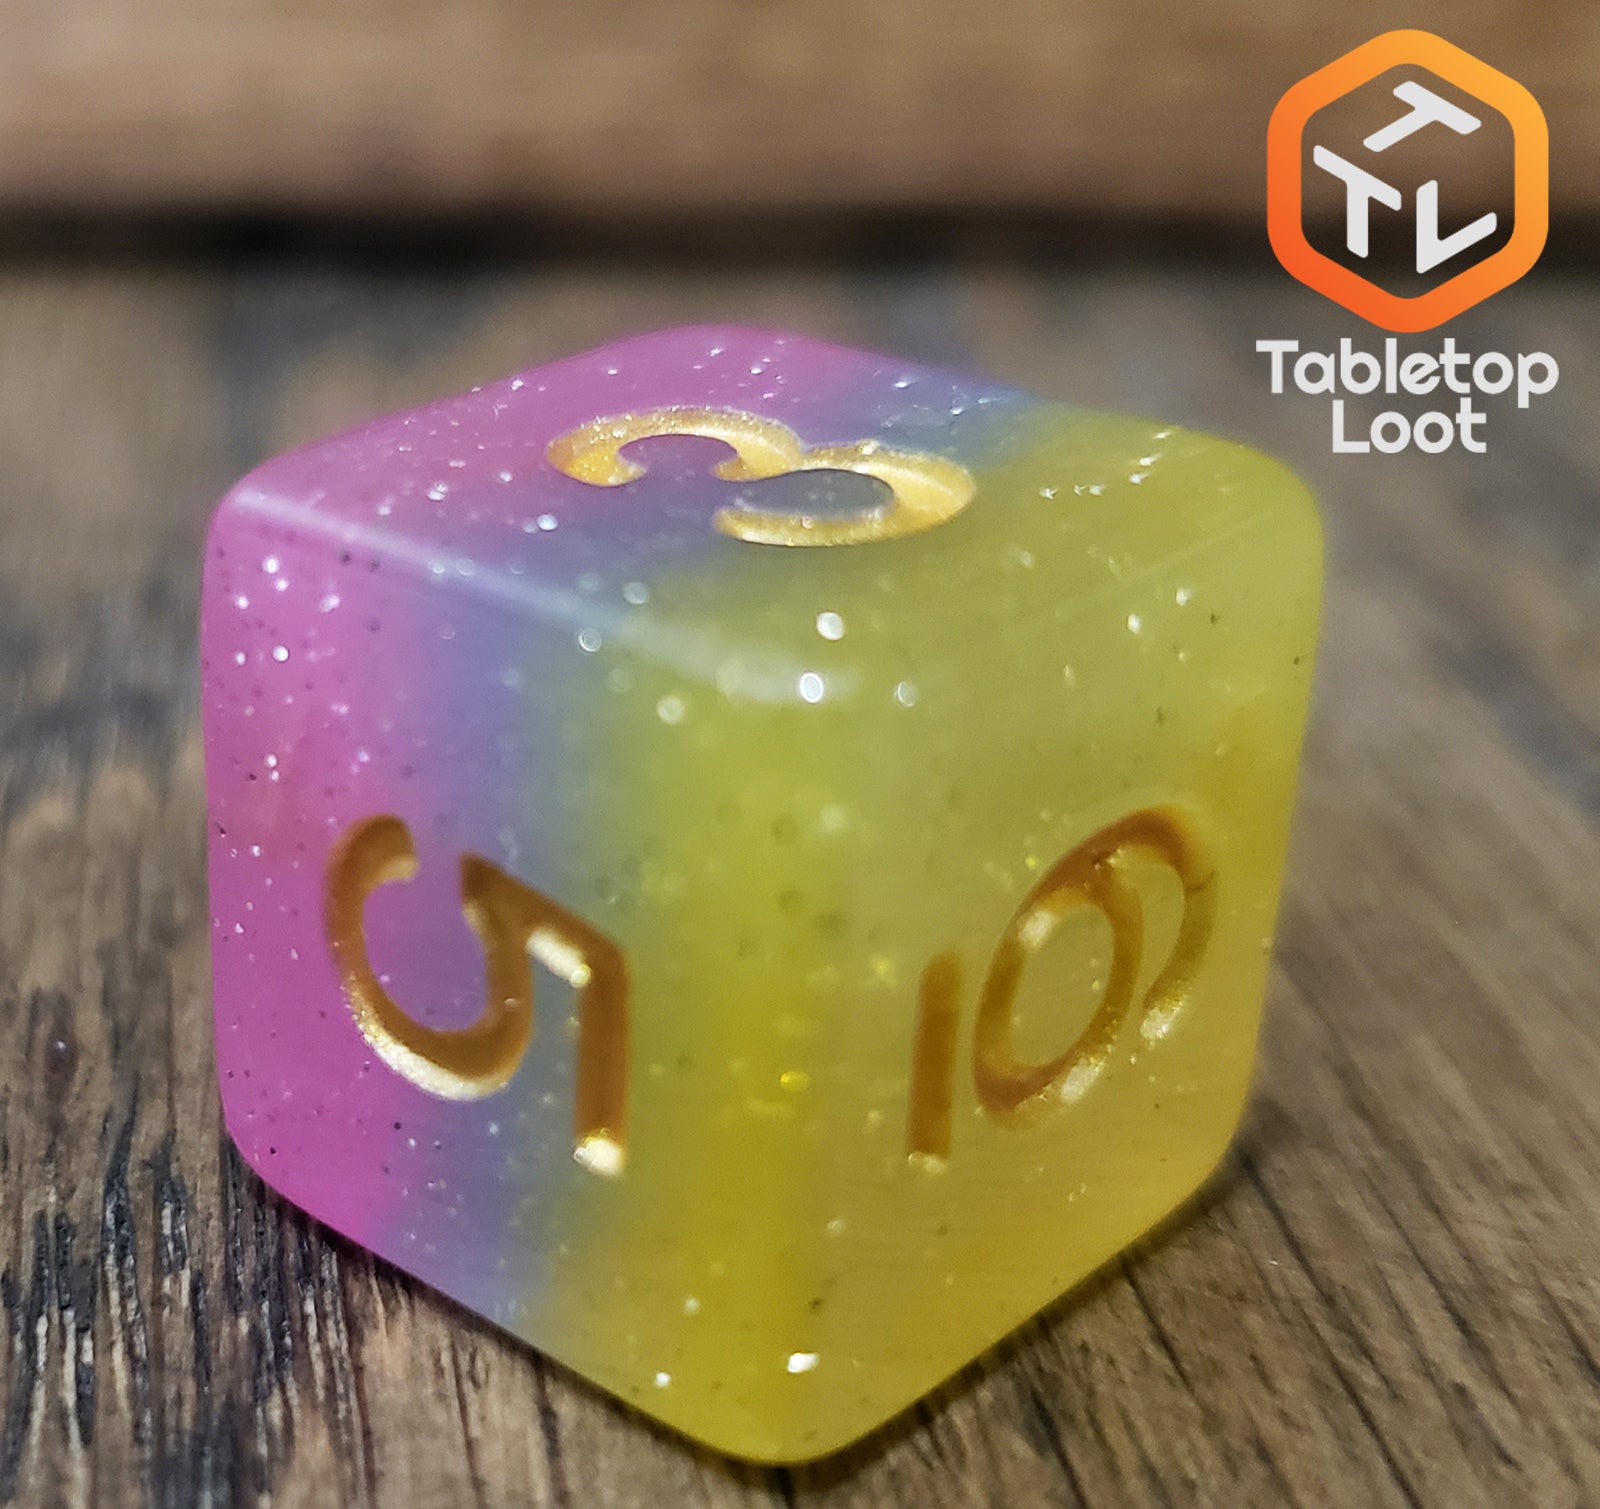 A close up of the D6 from the Candyland 7 piece dice set from Tabletop Loot with layers of yellow, blue, and pink glittery resin and gold numbering.